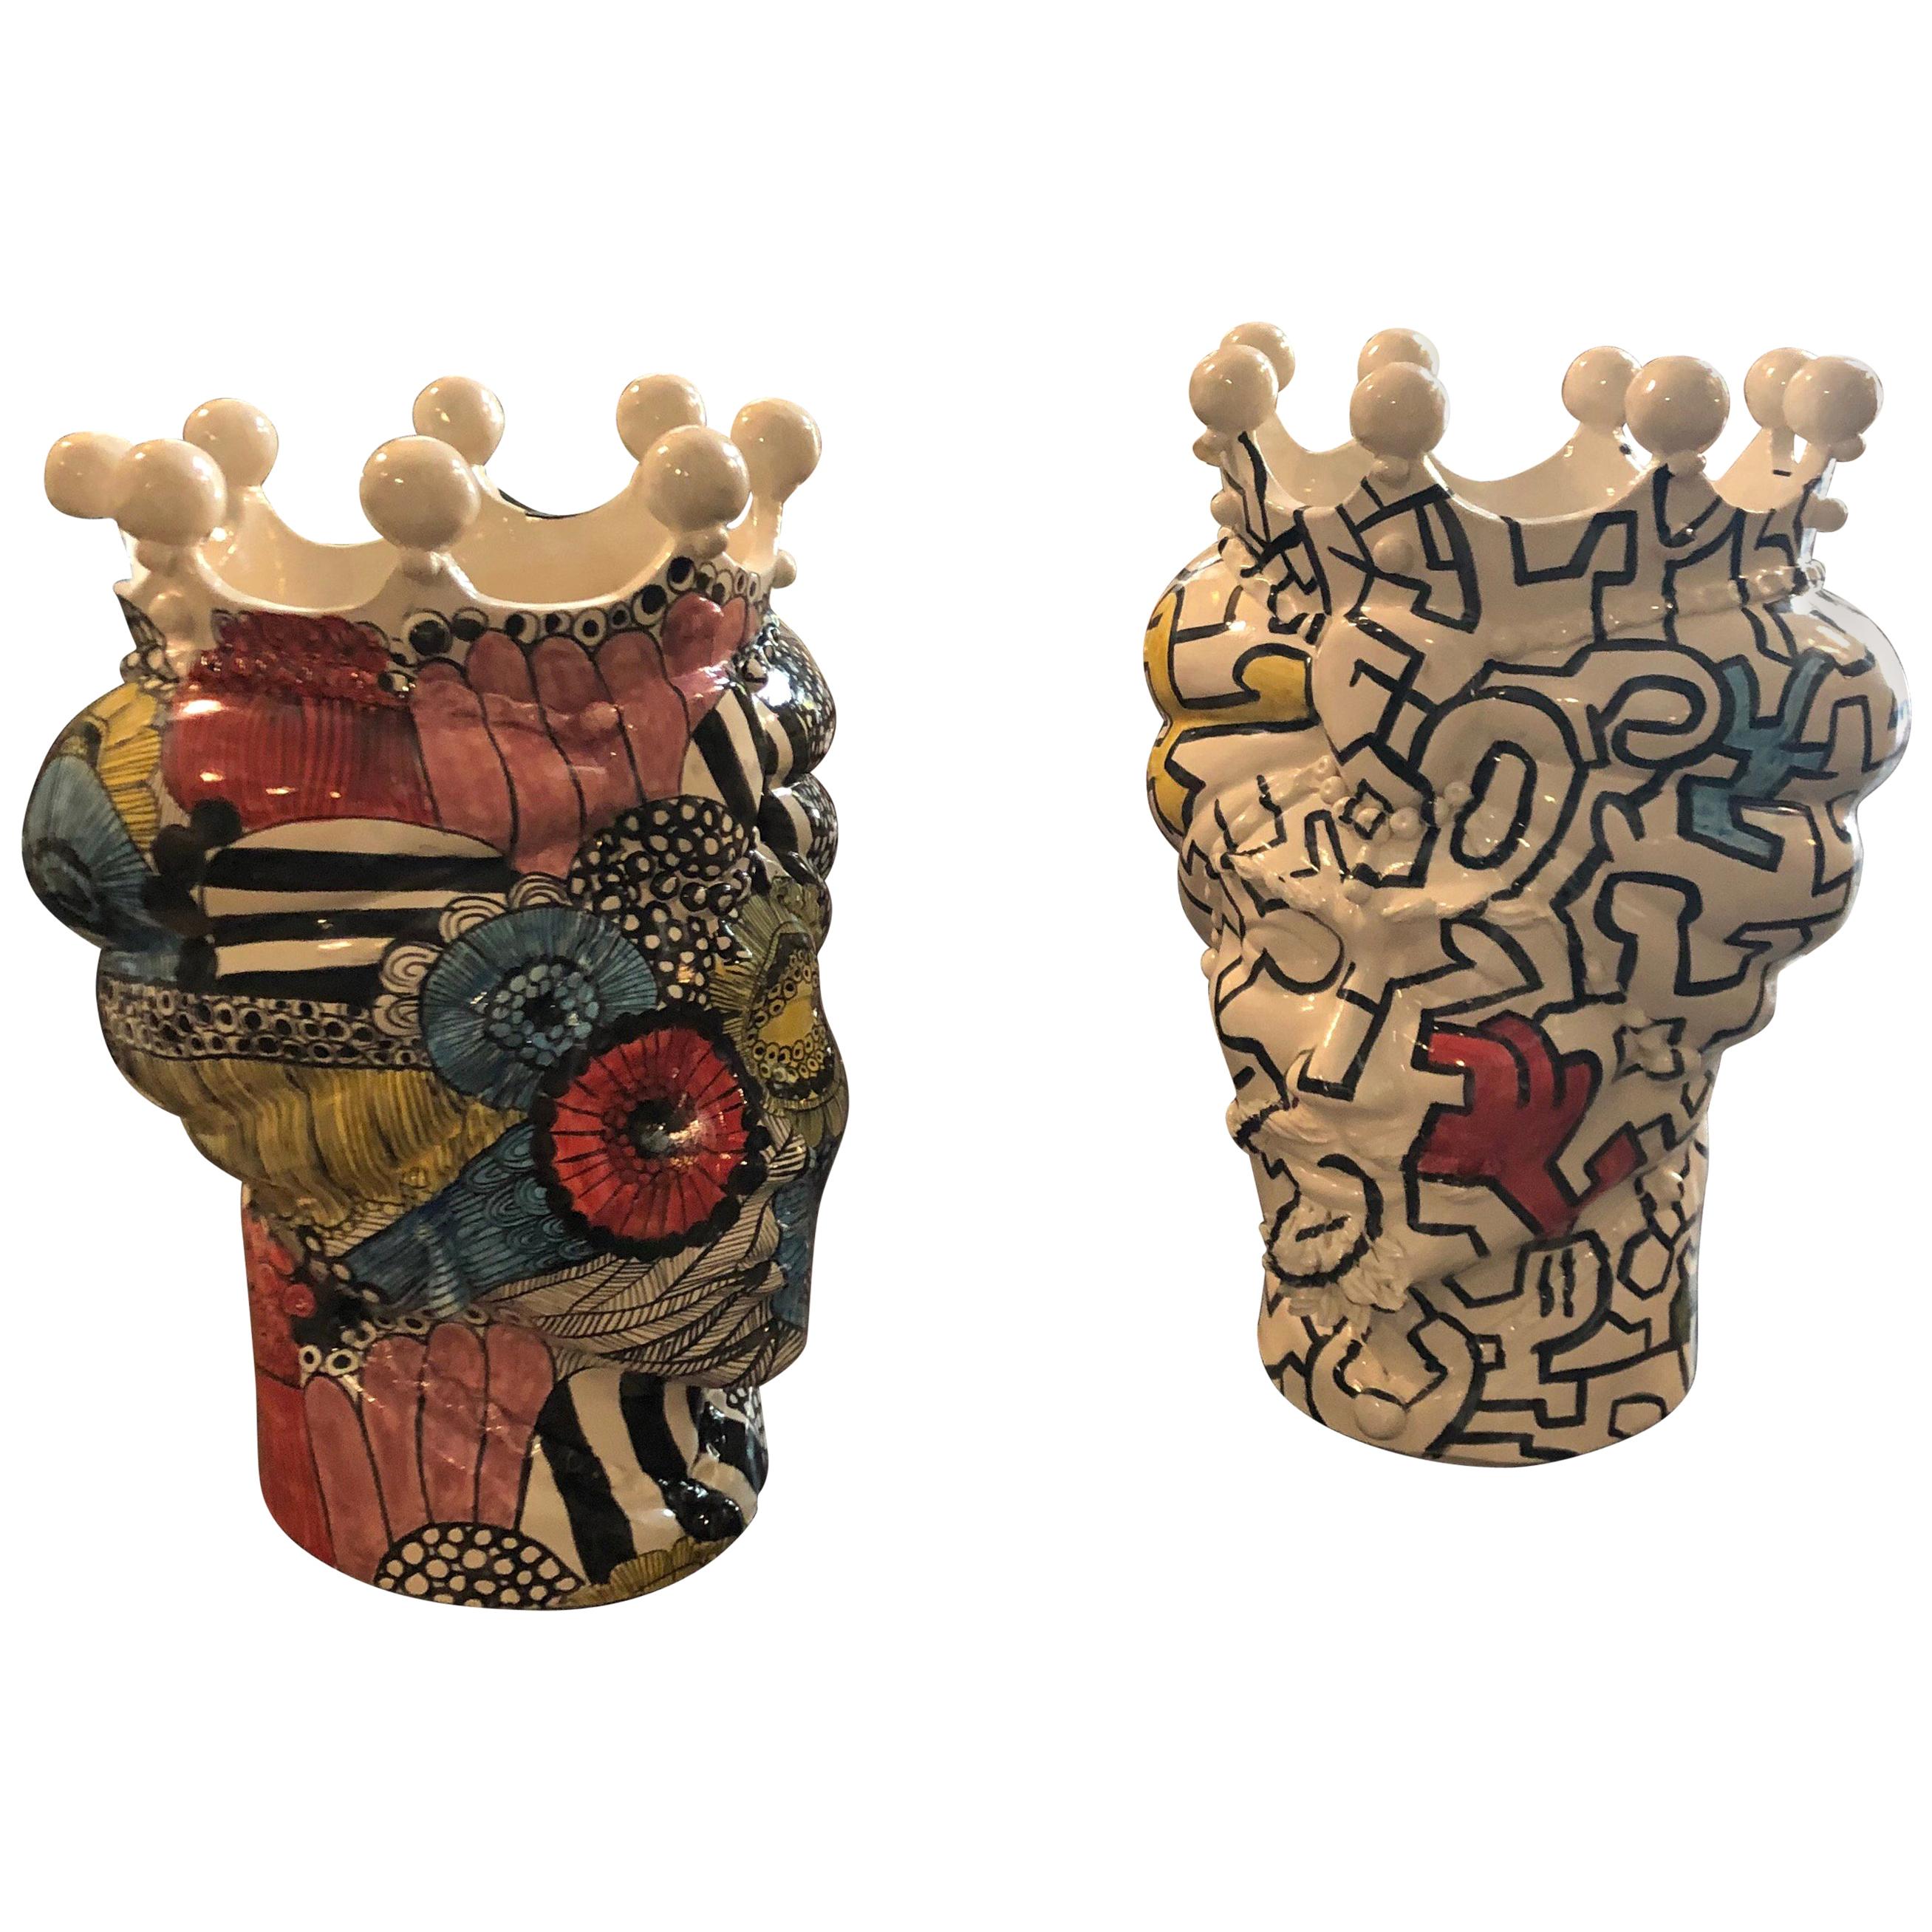 Two Pop Art Inspired Hand Painted Clay Sicilian Moro's Head Vases